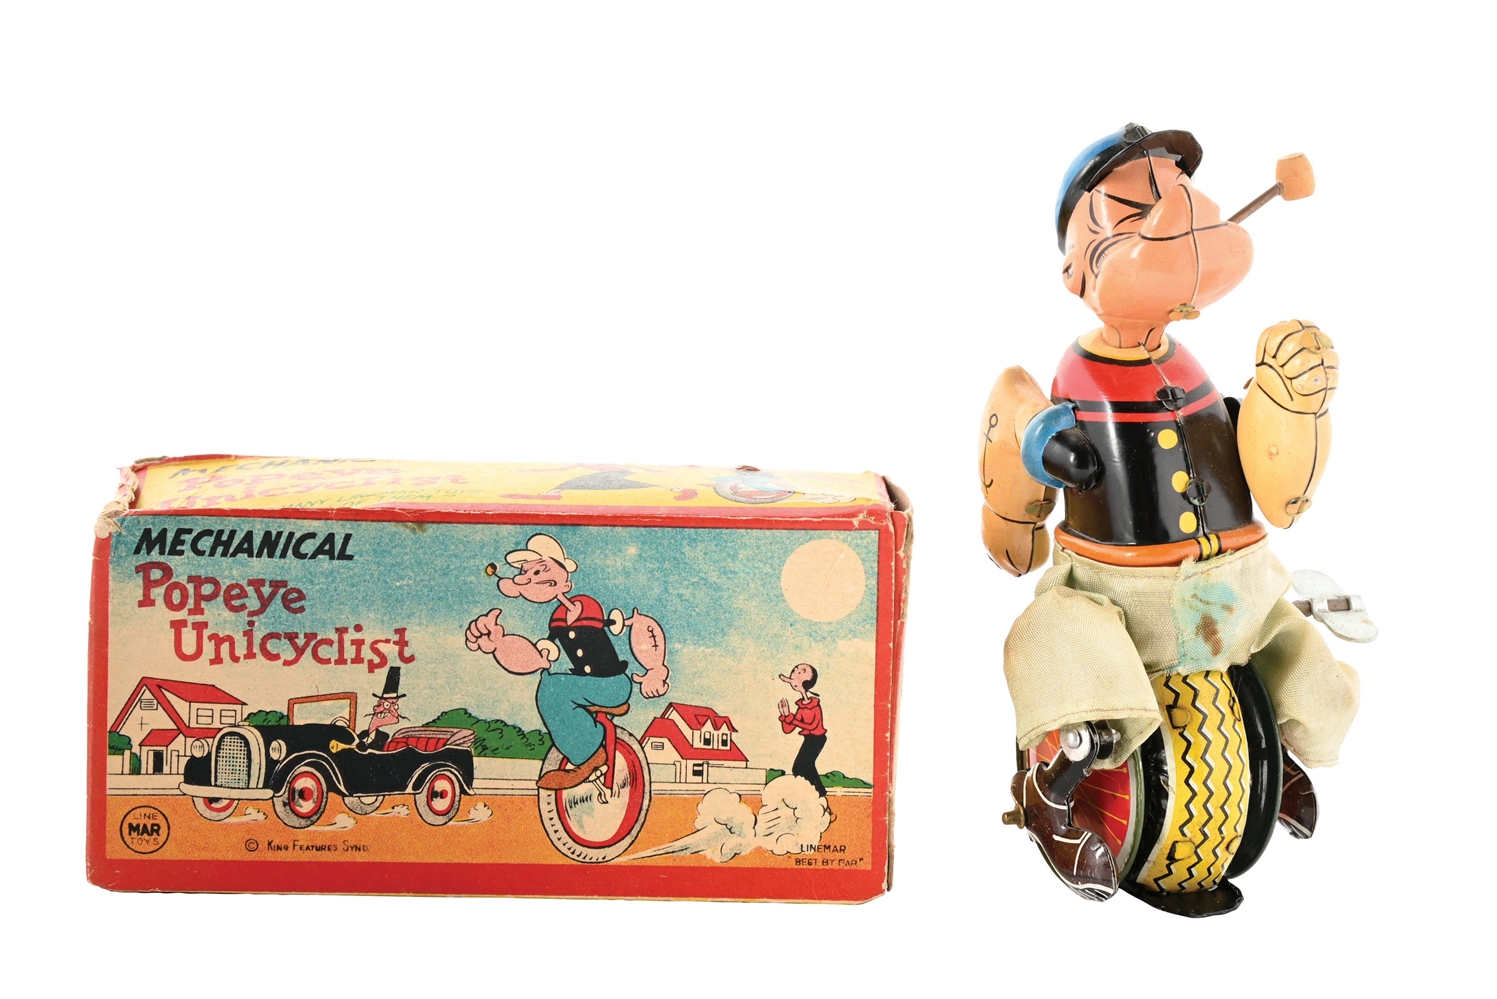 JAPANESE LINEMAR TIN LITHO WIND-UP POPEYE UNICYCLIST TOY IN ORIGINAL BOX.